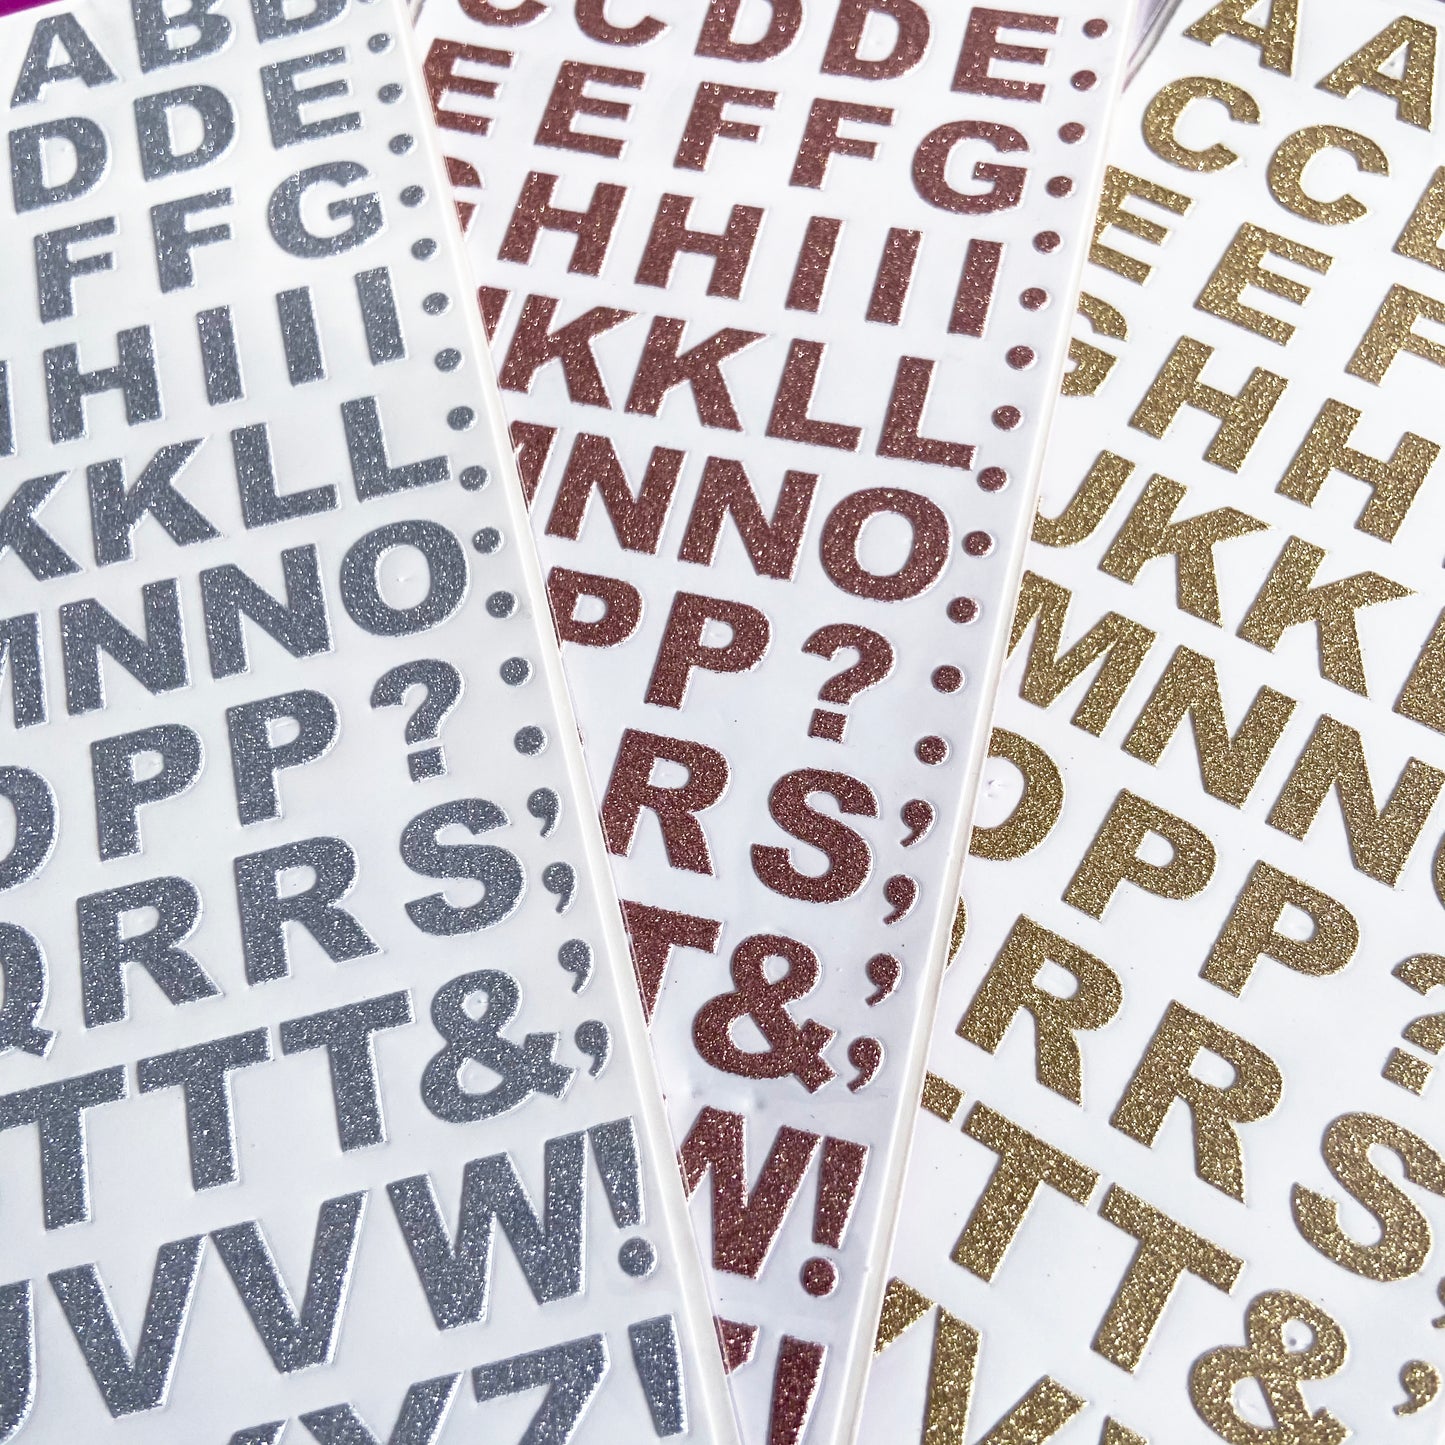 Sparkly Glitter Alphabet Letters Numbers Peel Off Stickers Gold Silver Rose Gold - SweetpeaStore